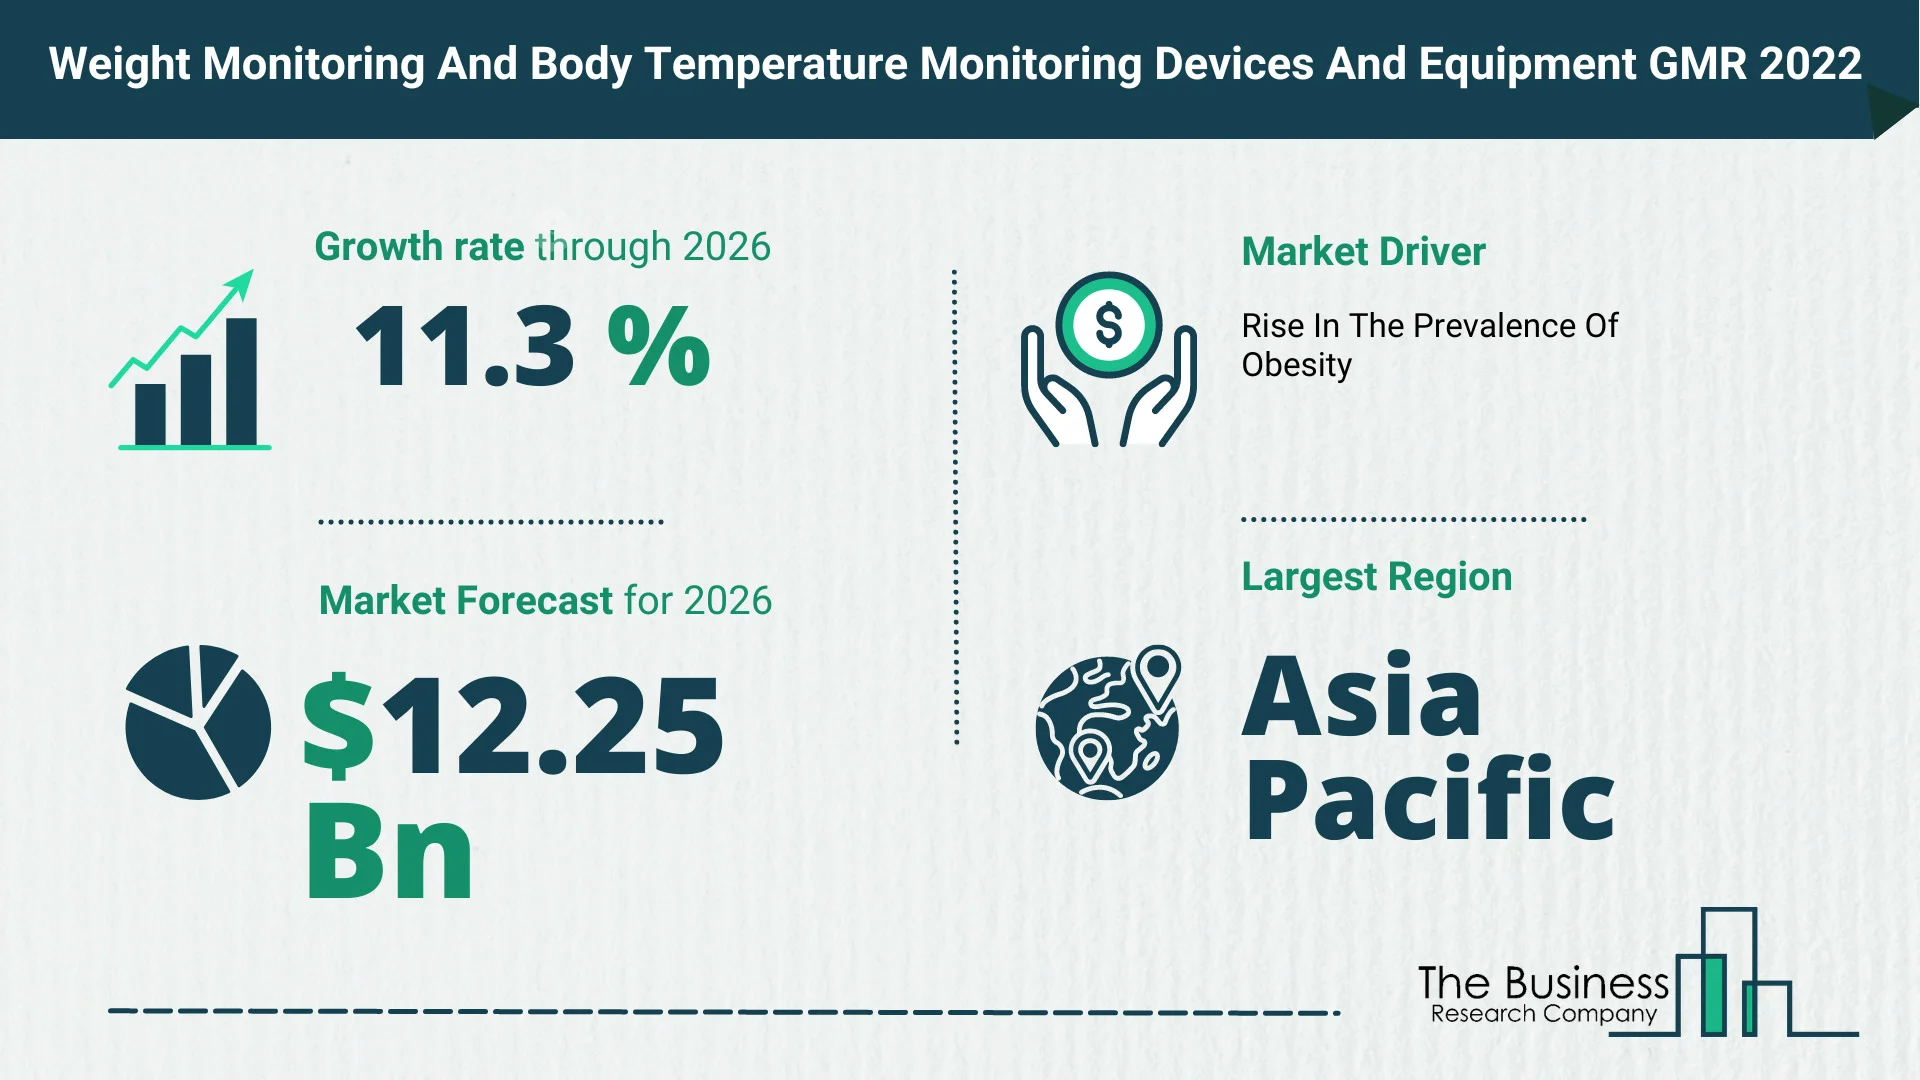 What Is The Weight Monitoring And Body Temperature Monitoring Devices And Equipment Market Overview In 2022?